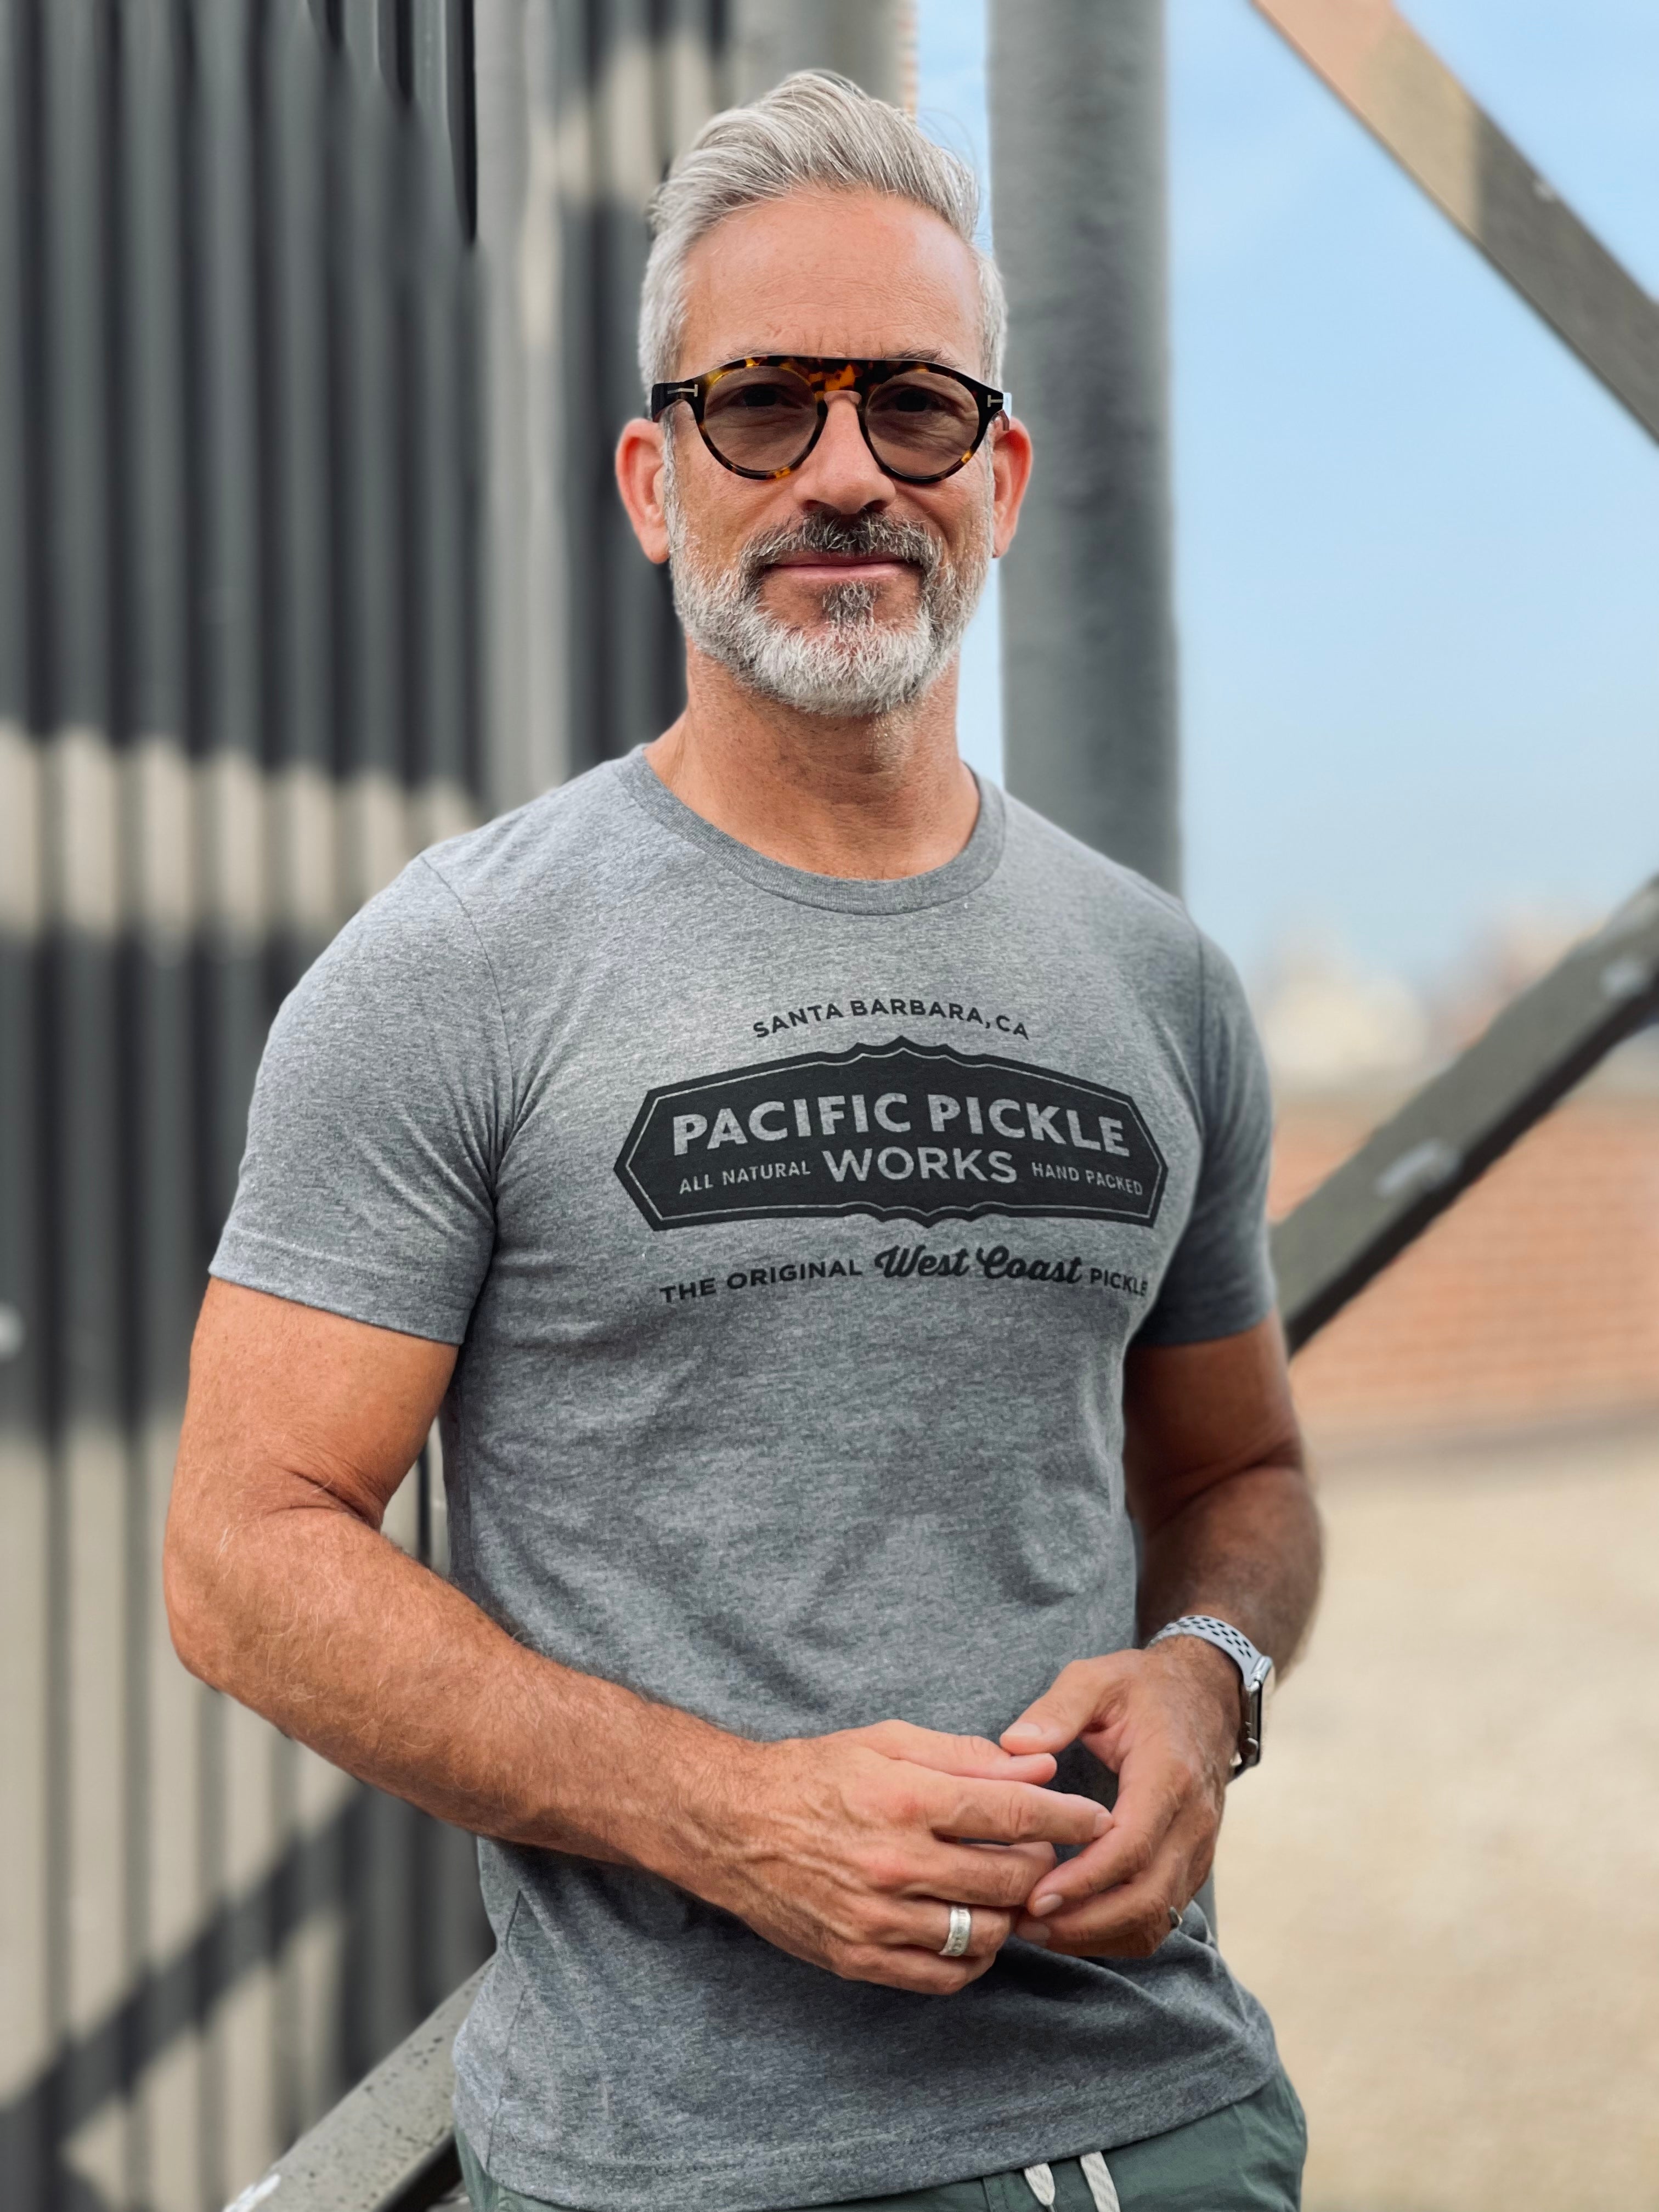 T-shirt - Unisex Heather Gray Logo – Pacific Pickle Works